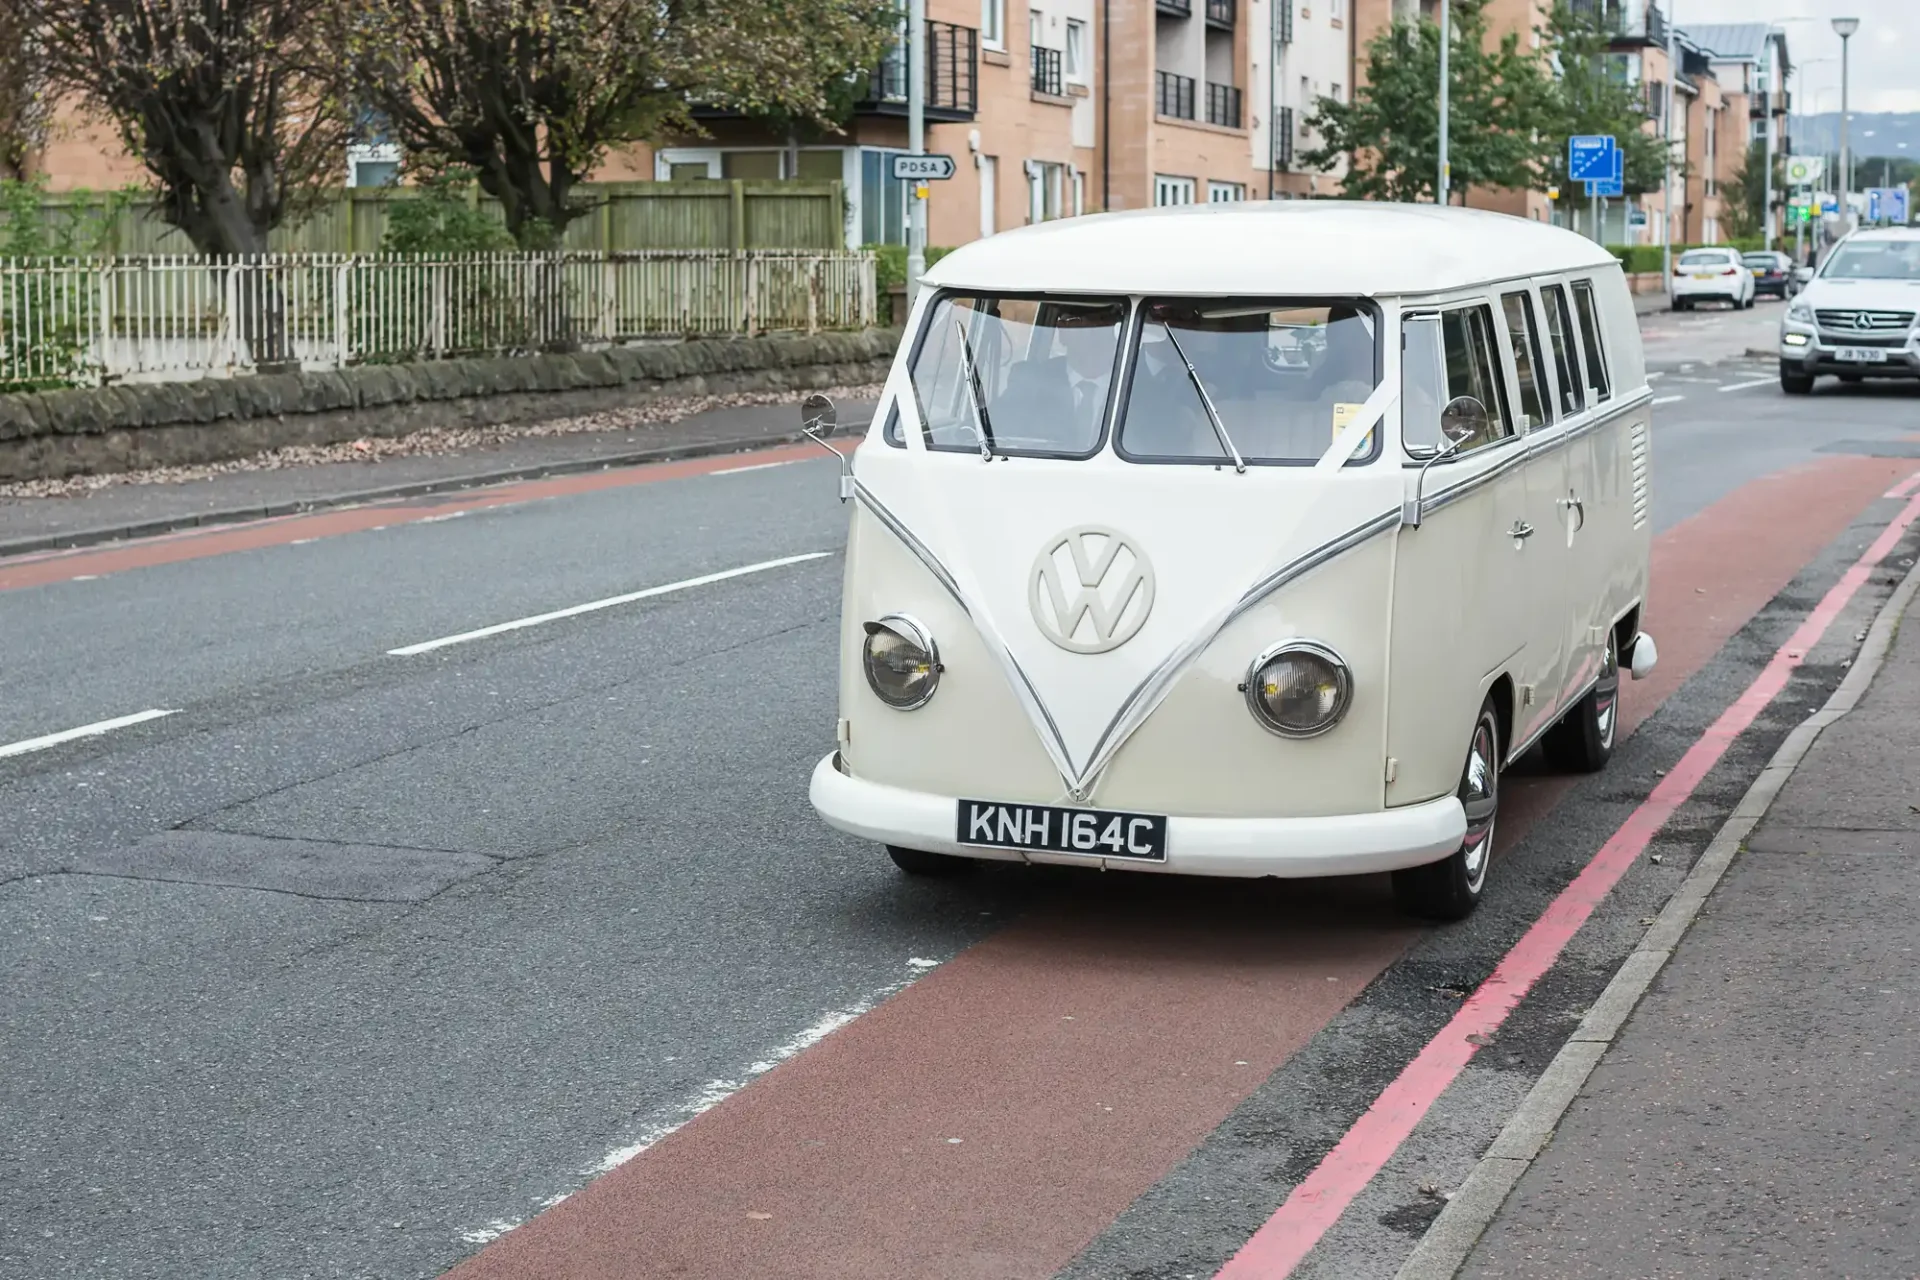 A vintage cream-colored volkswagen bus parked on a city street, with buildings in the background.